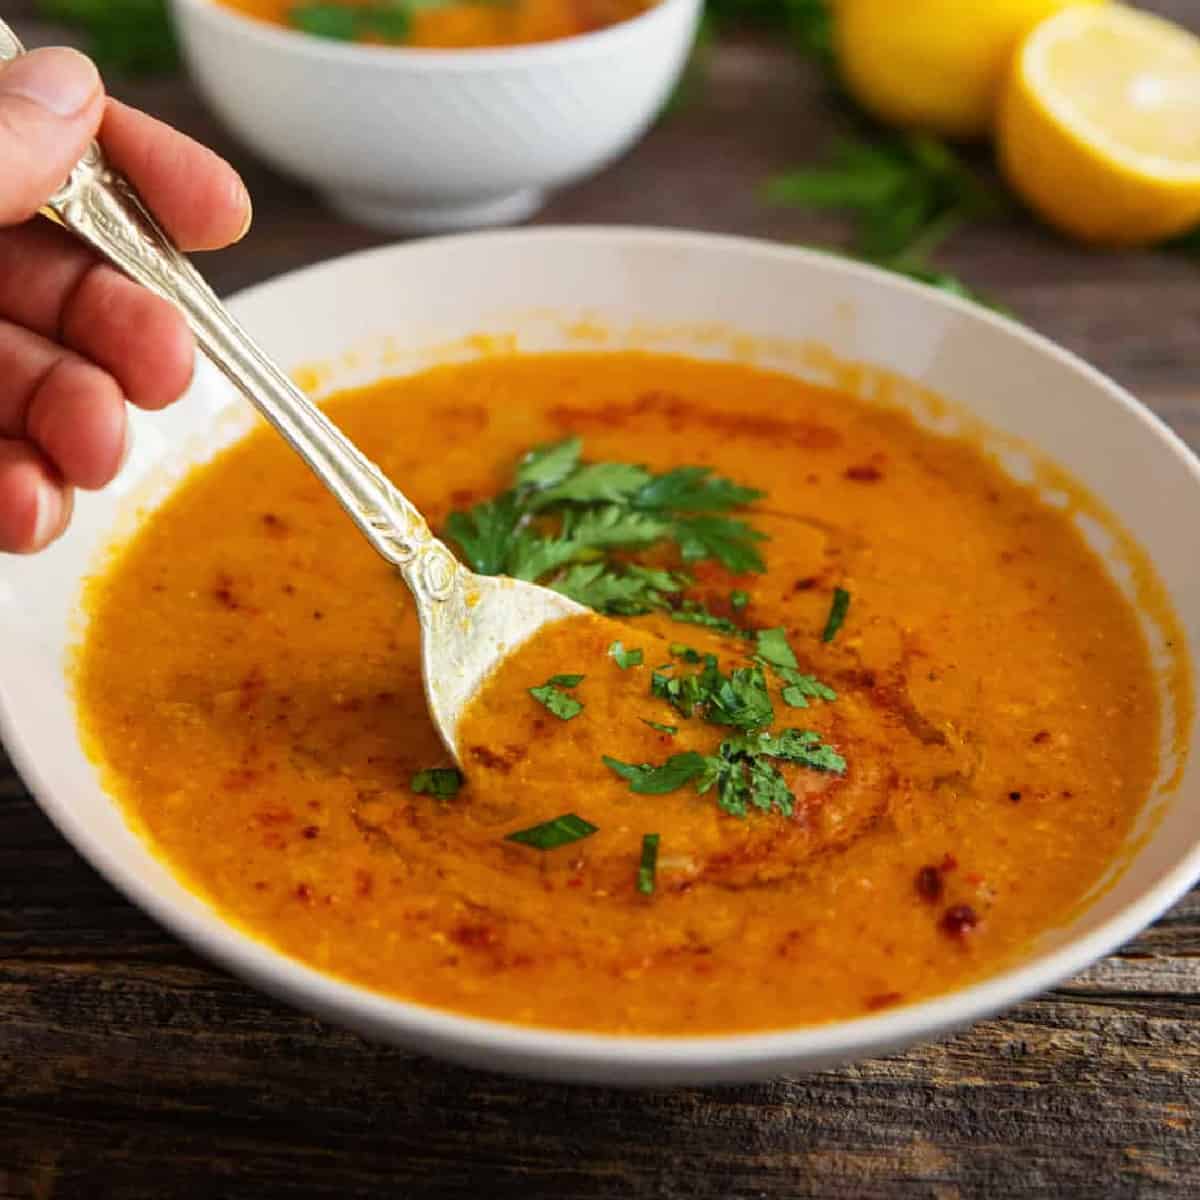 Get ready to enjoy a Moroccan-style red lentil soup recipe that's ready in just 30 minutes! This comforting soup has a lemony zing and rich flavor thanks to a unique combination of spices.
